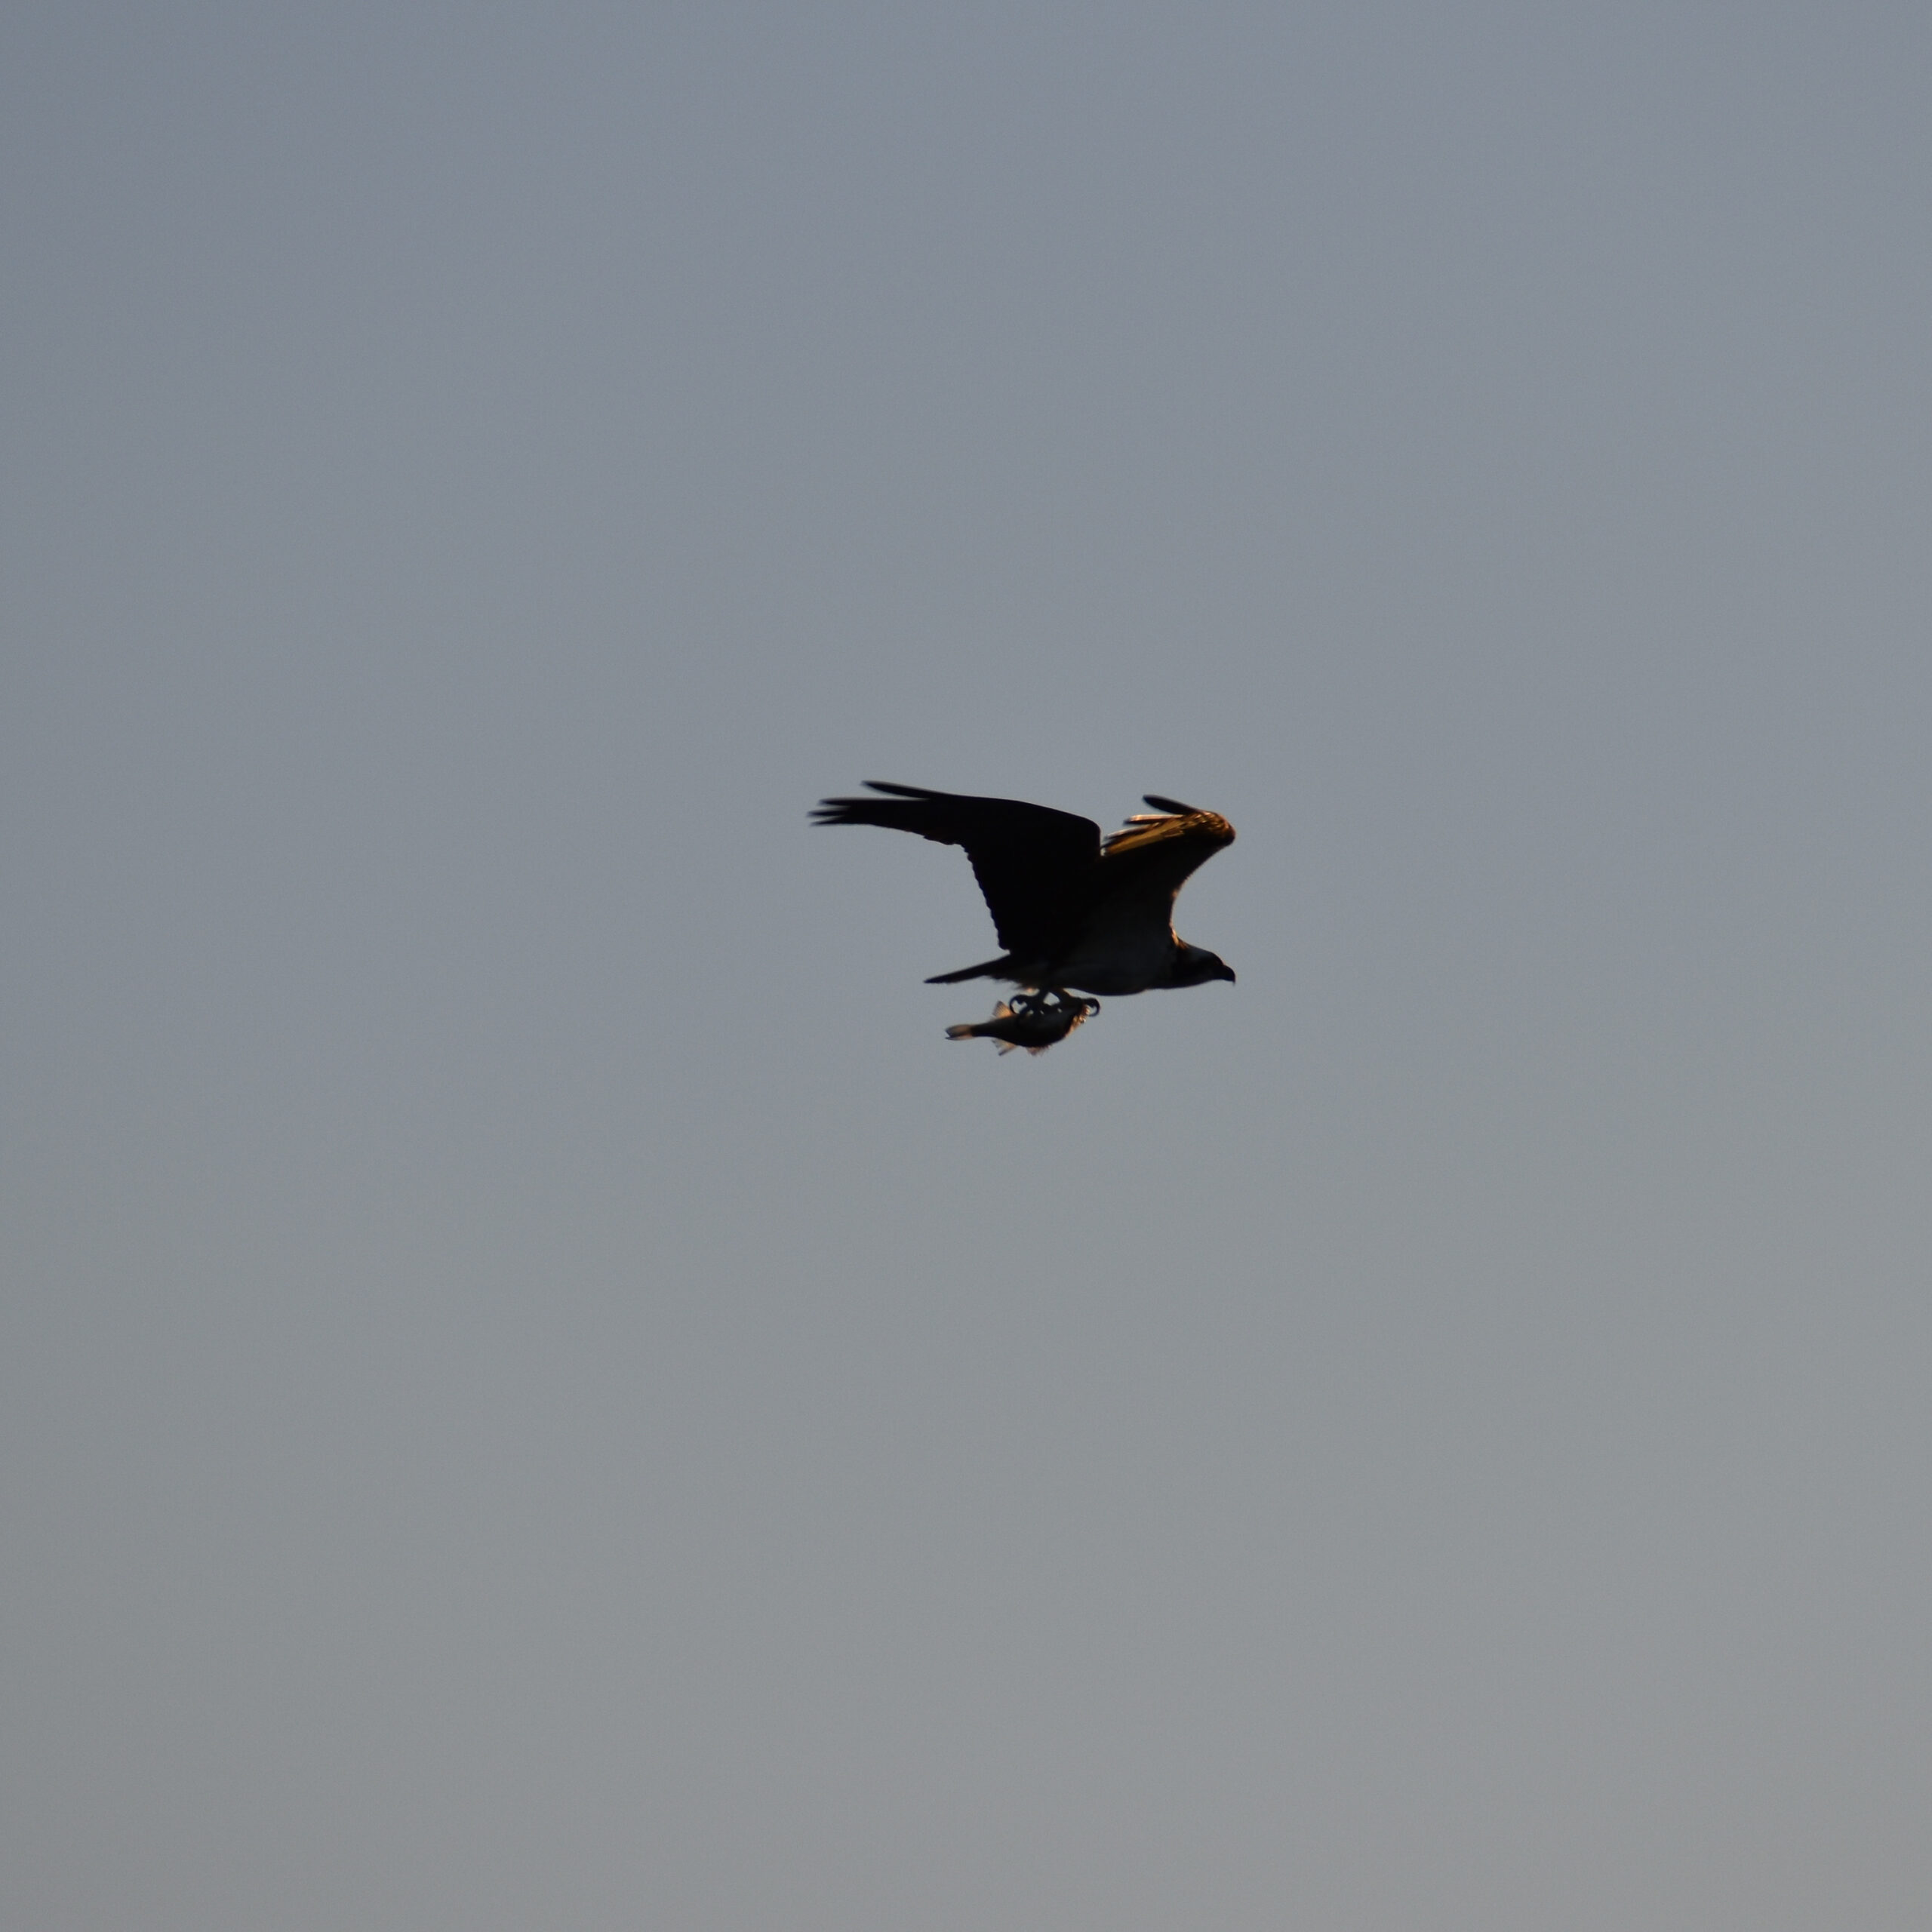 The silhouette of a raptor with a small fish in its talons.